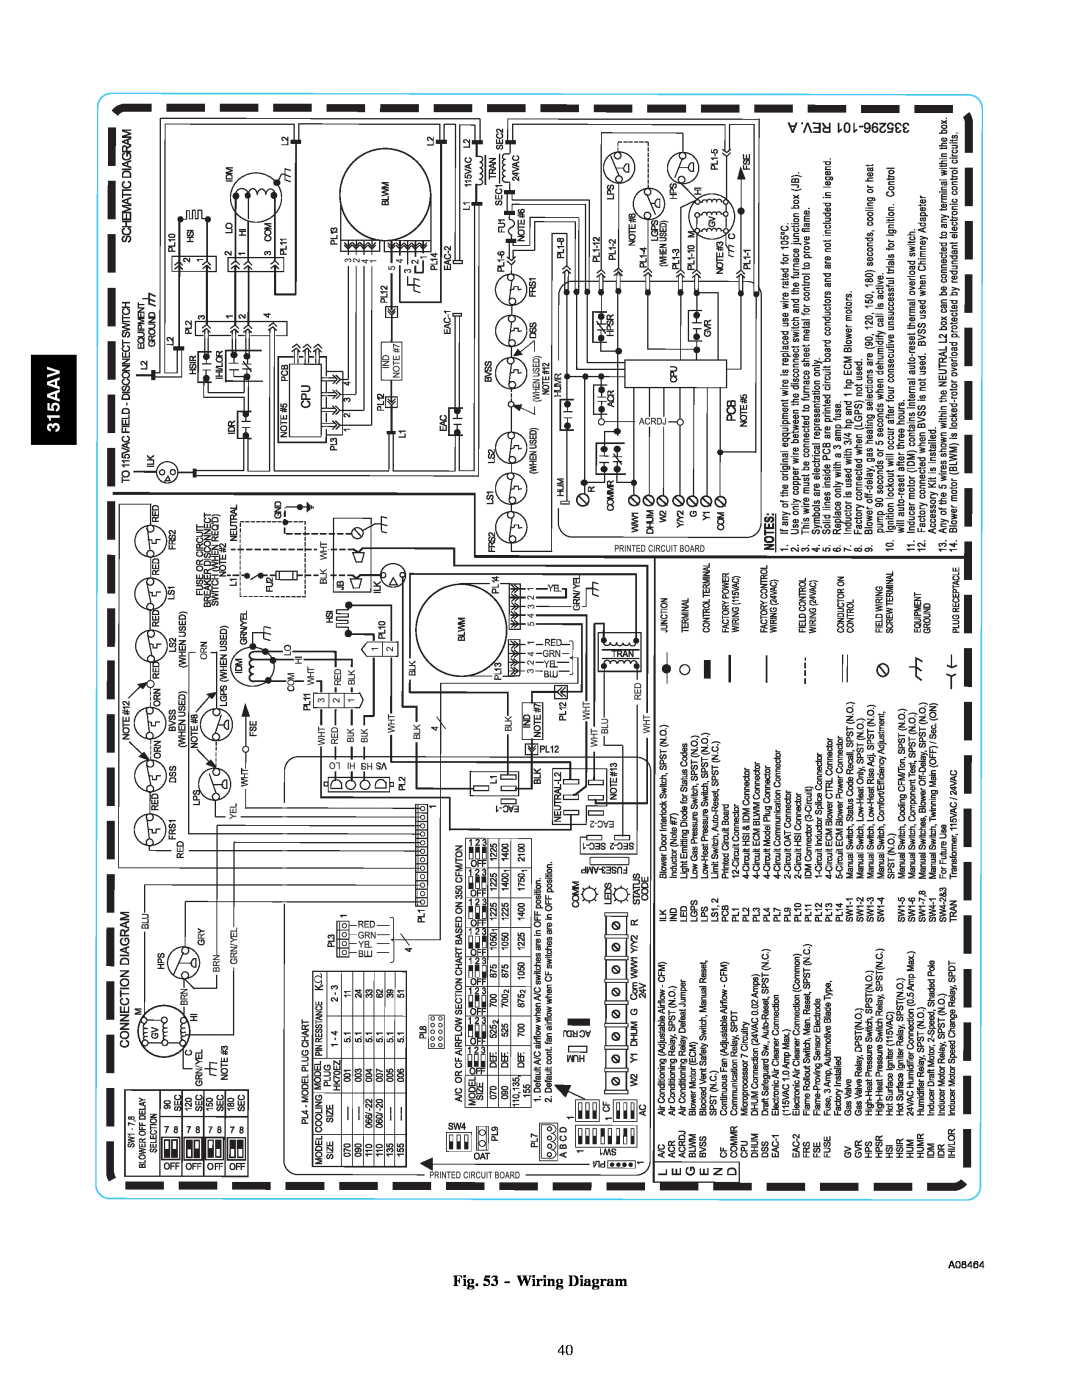 Bryant 315AAV instruction manual Wiring Diagram, A08464 